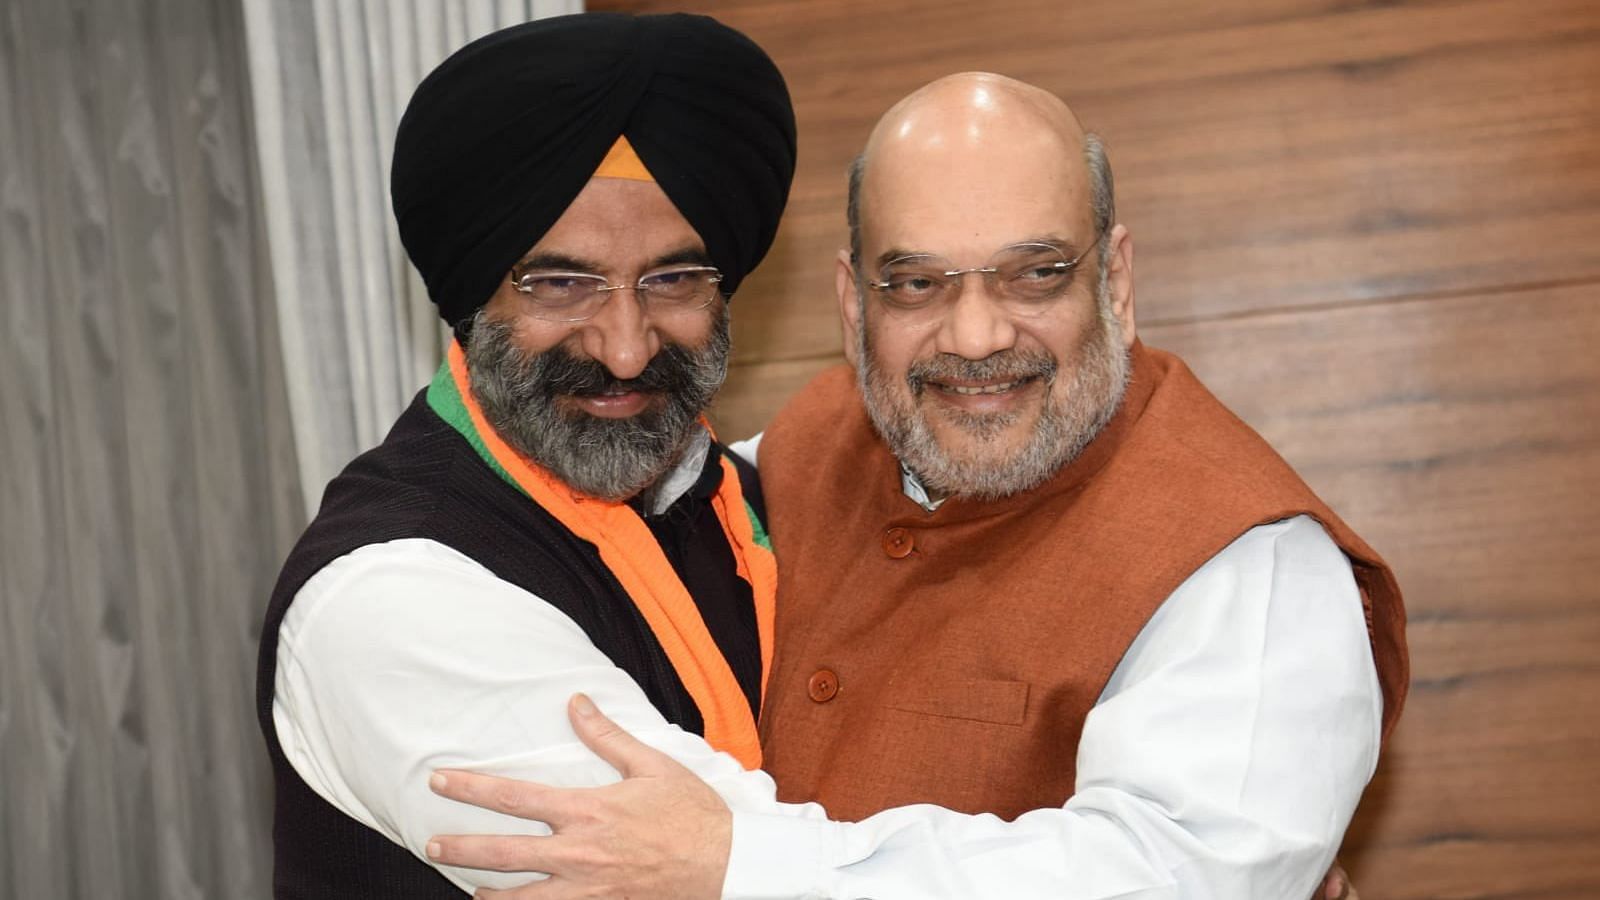 <div class="paragraphs"><p>Shiromani Akali Dal (SAD) leader Manjinder Singh Sirsa, on Wednesday, joined the Bharatiya Janata Party (BJP), ahead of the next year's Punjab Assembly elections.</p></div>